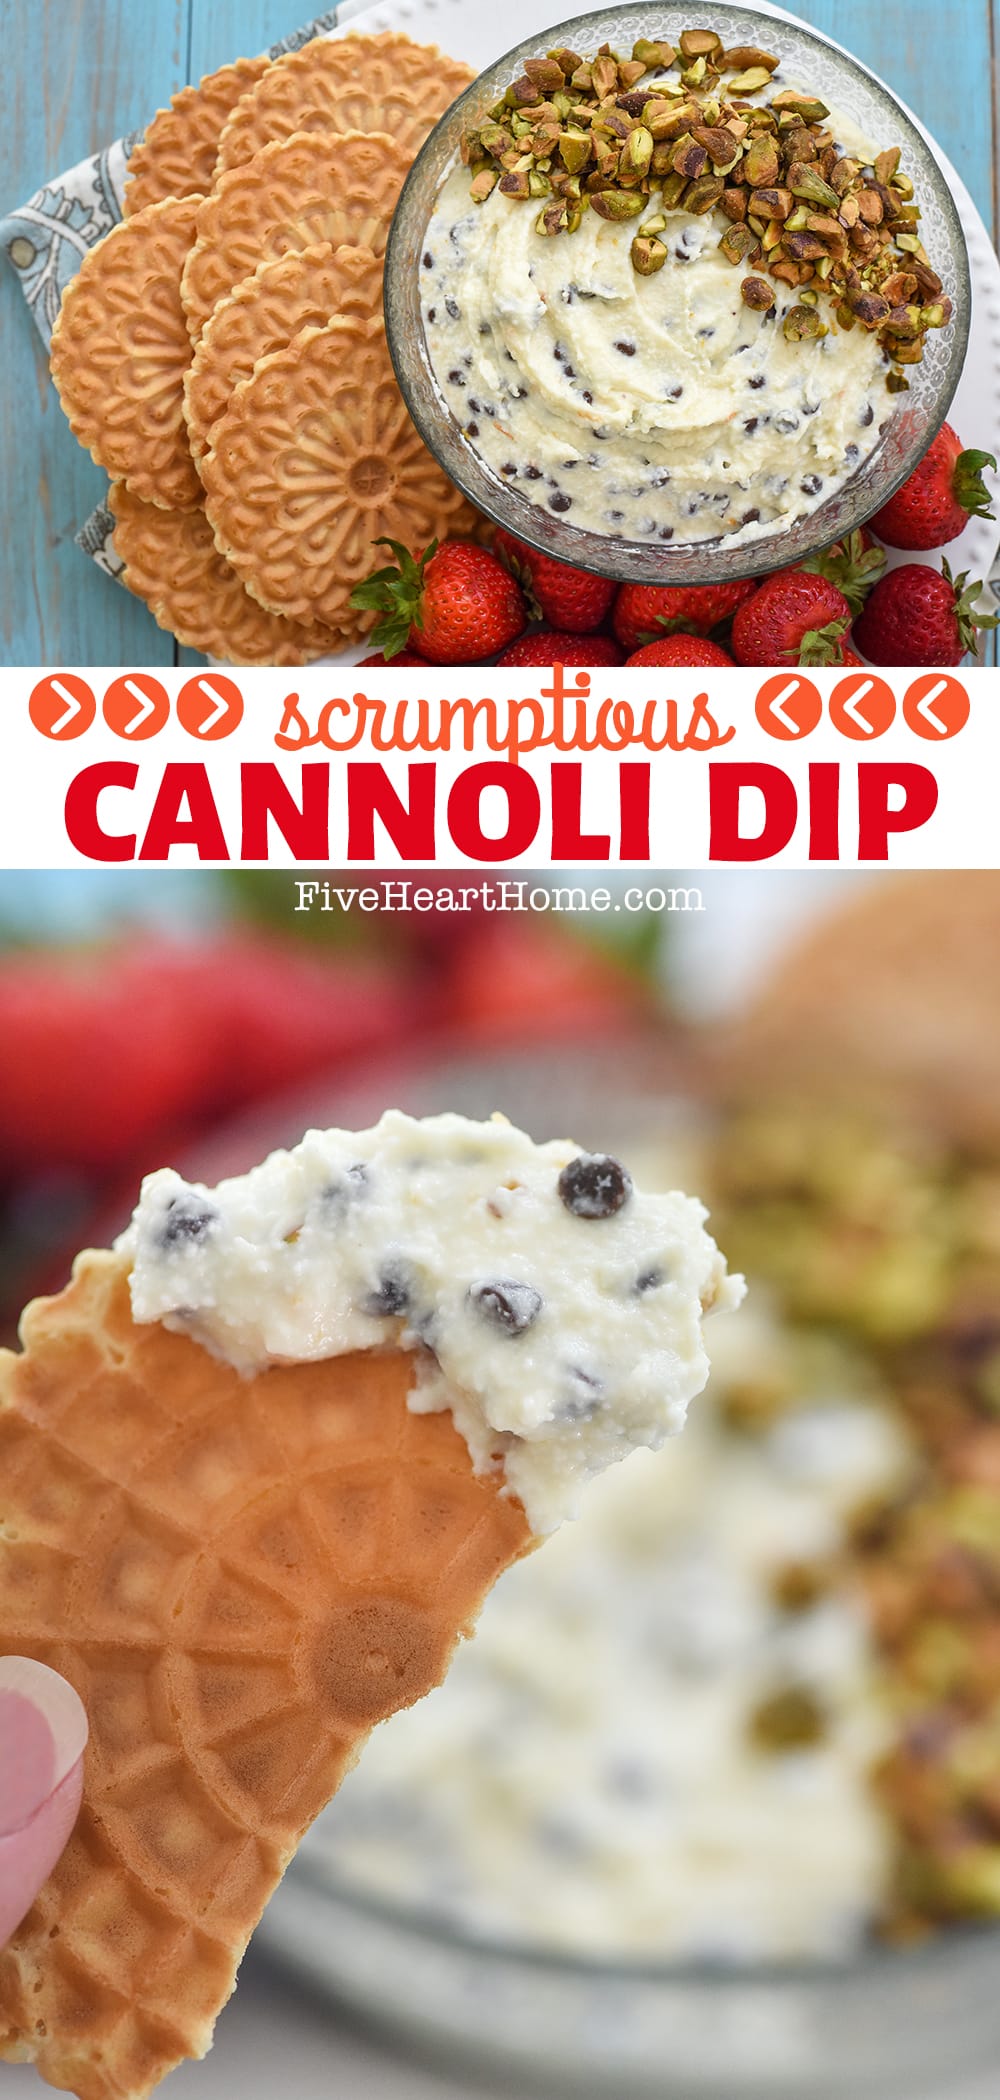 Cannoli Dip ~ a lightly sweet recipe that tastes like cannoli filling but with the convenience of a quick and easy dip, made with ricotta cheese and flavored with orange zest, semisweet chocolate, and crunchy pistachios! | FiveHeartHome.com via @fivehearthome